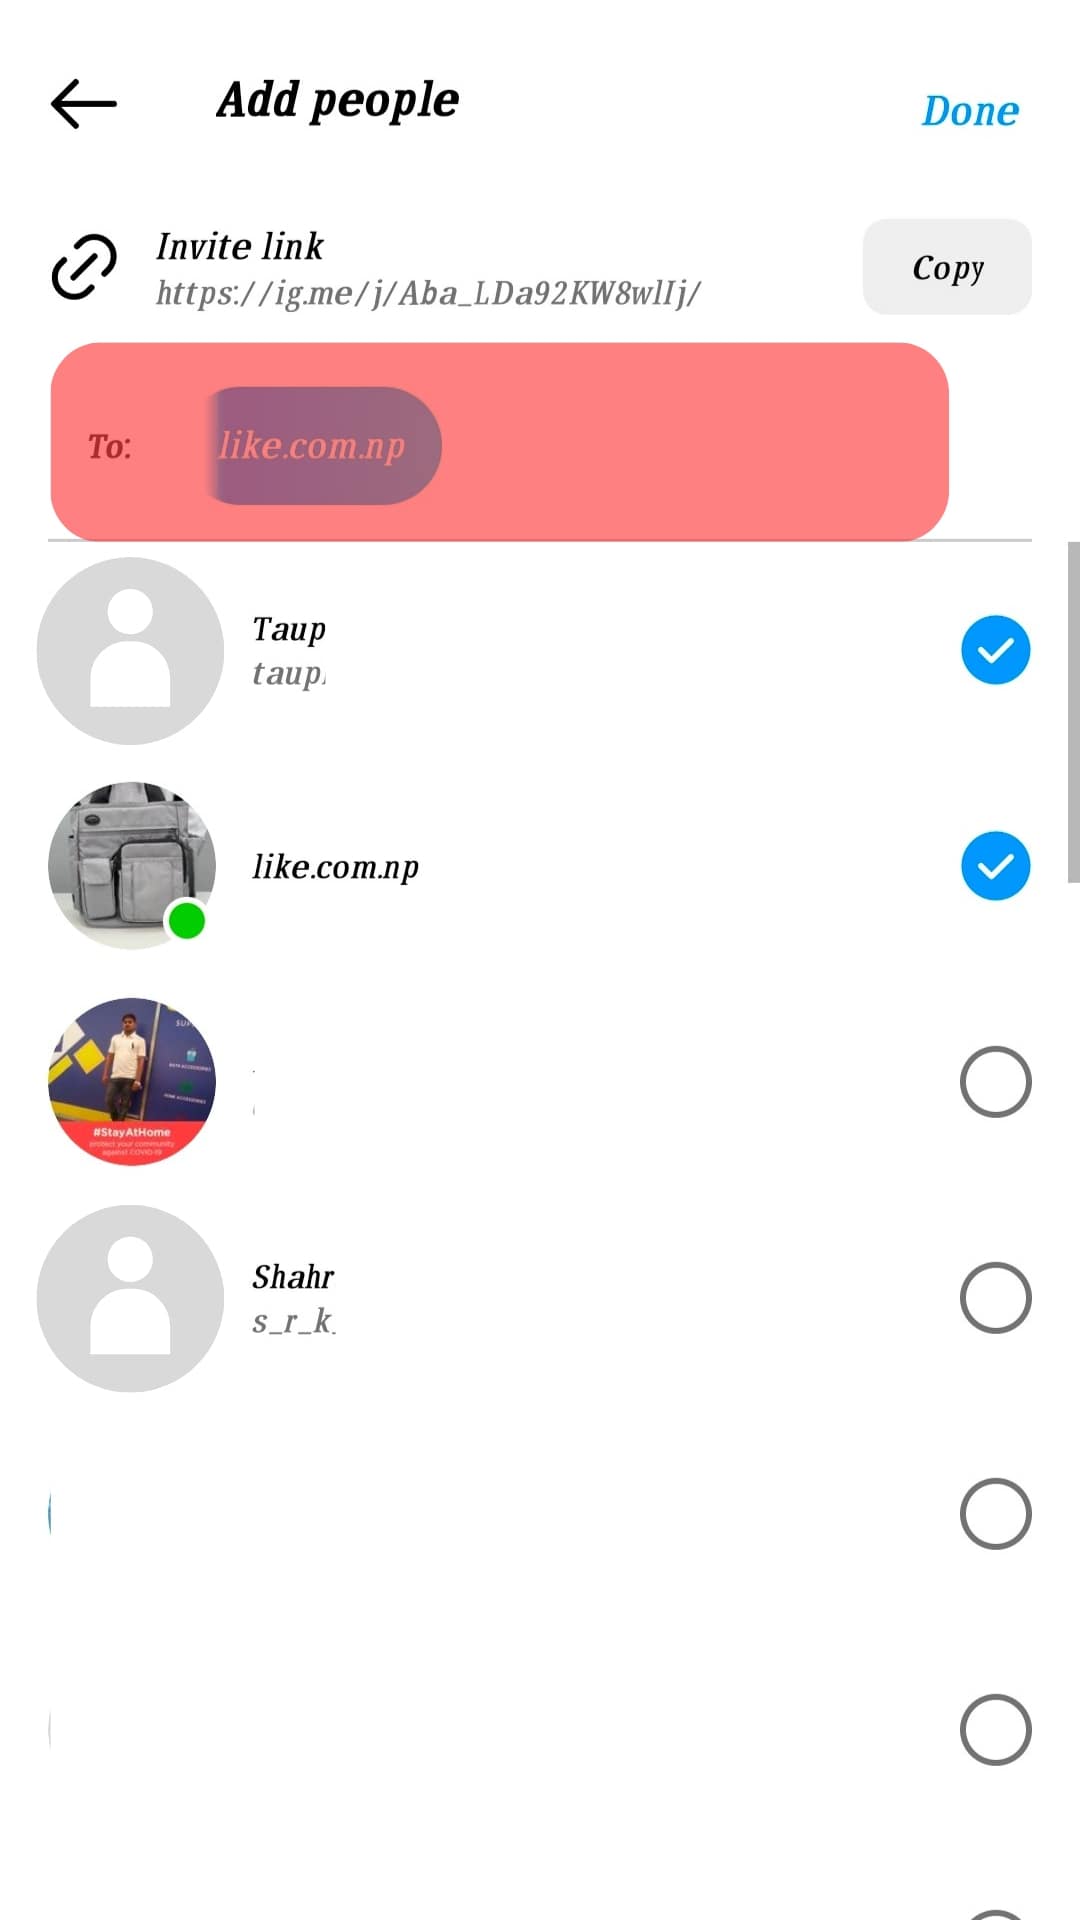 Select The People You Want To Add.